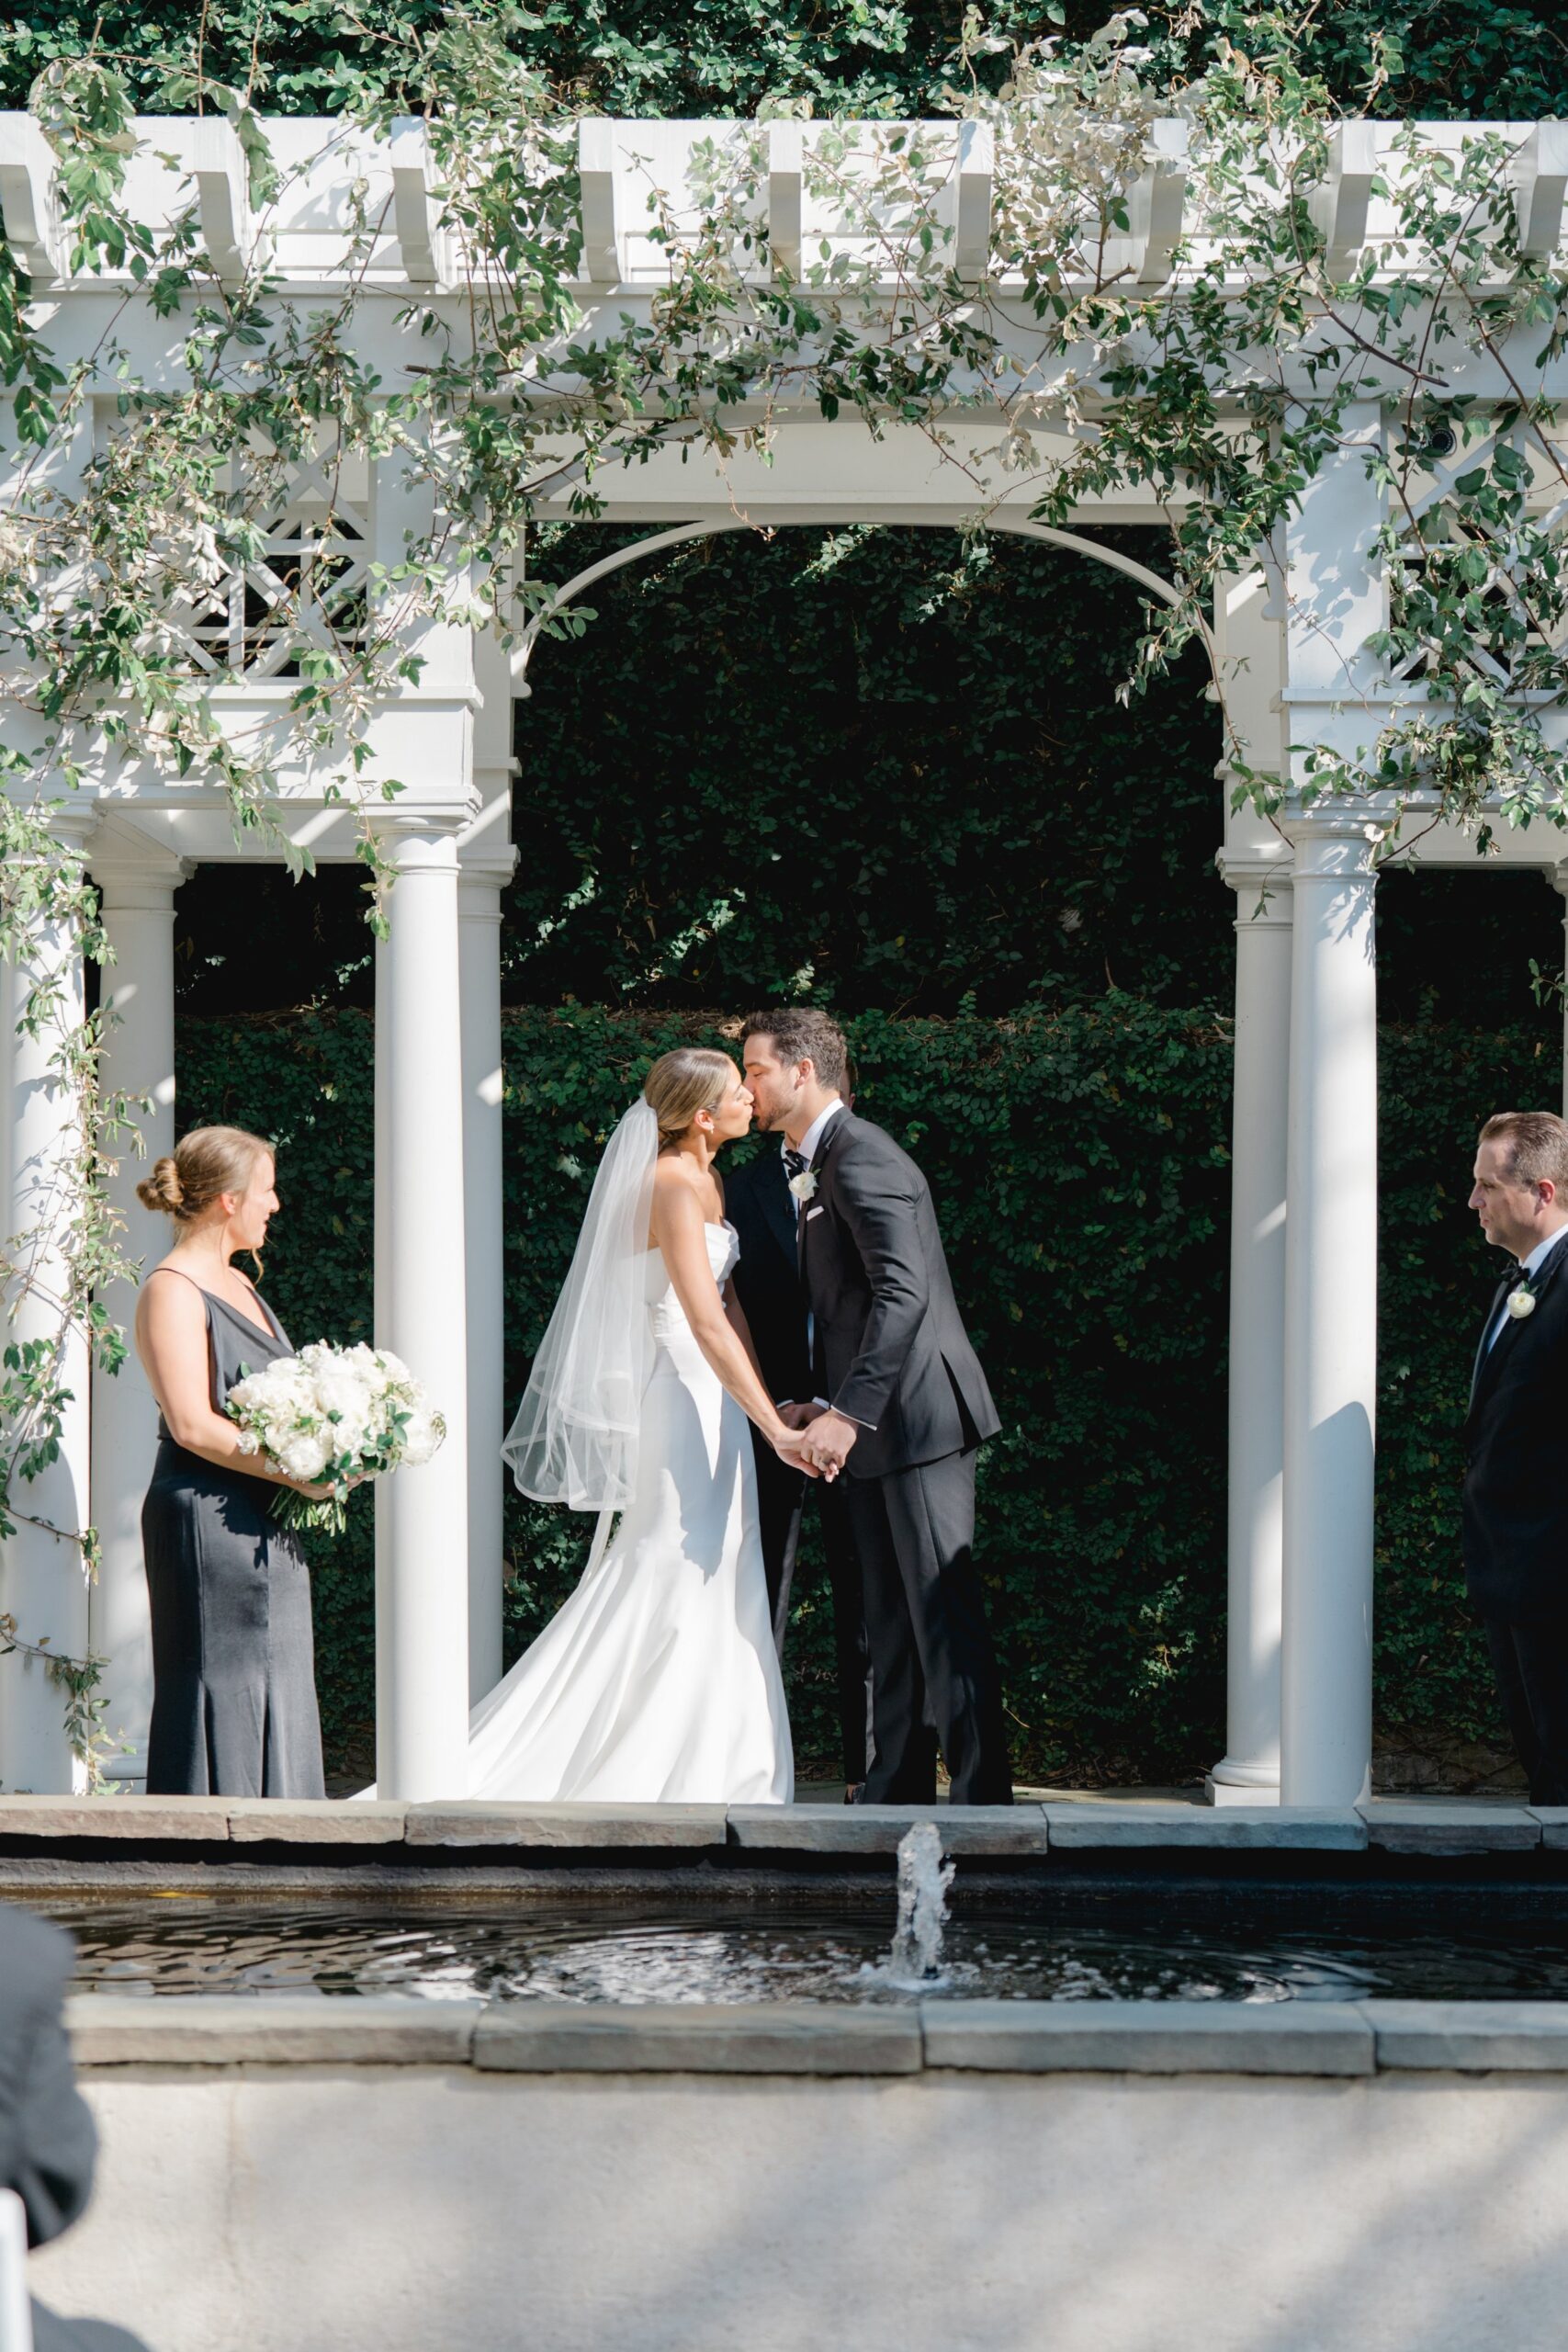 First kiss at William Aiken House spring wedding ceremony.